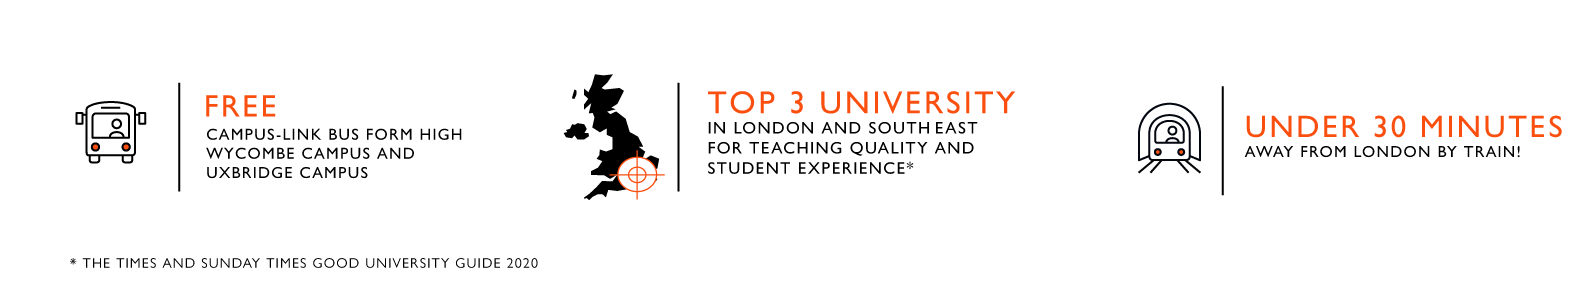 free campus bus Top-3 university for teaching quality Under 30 mins from london